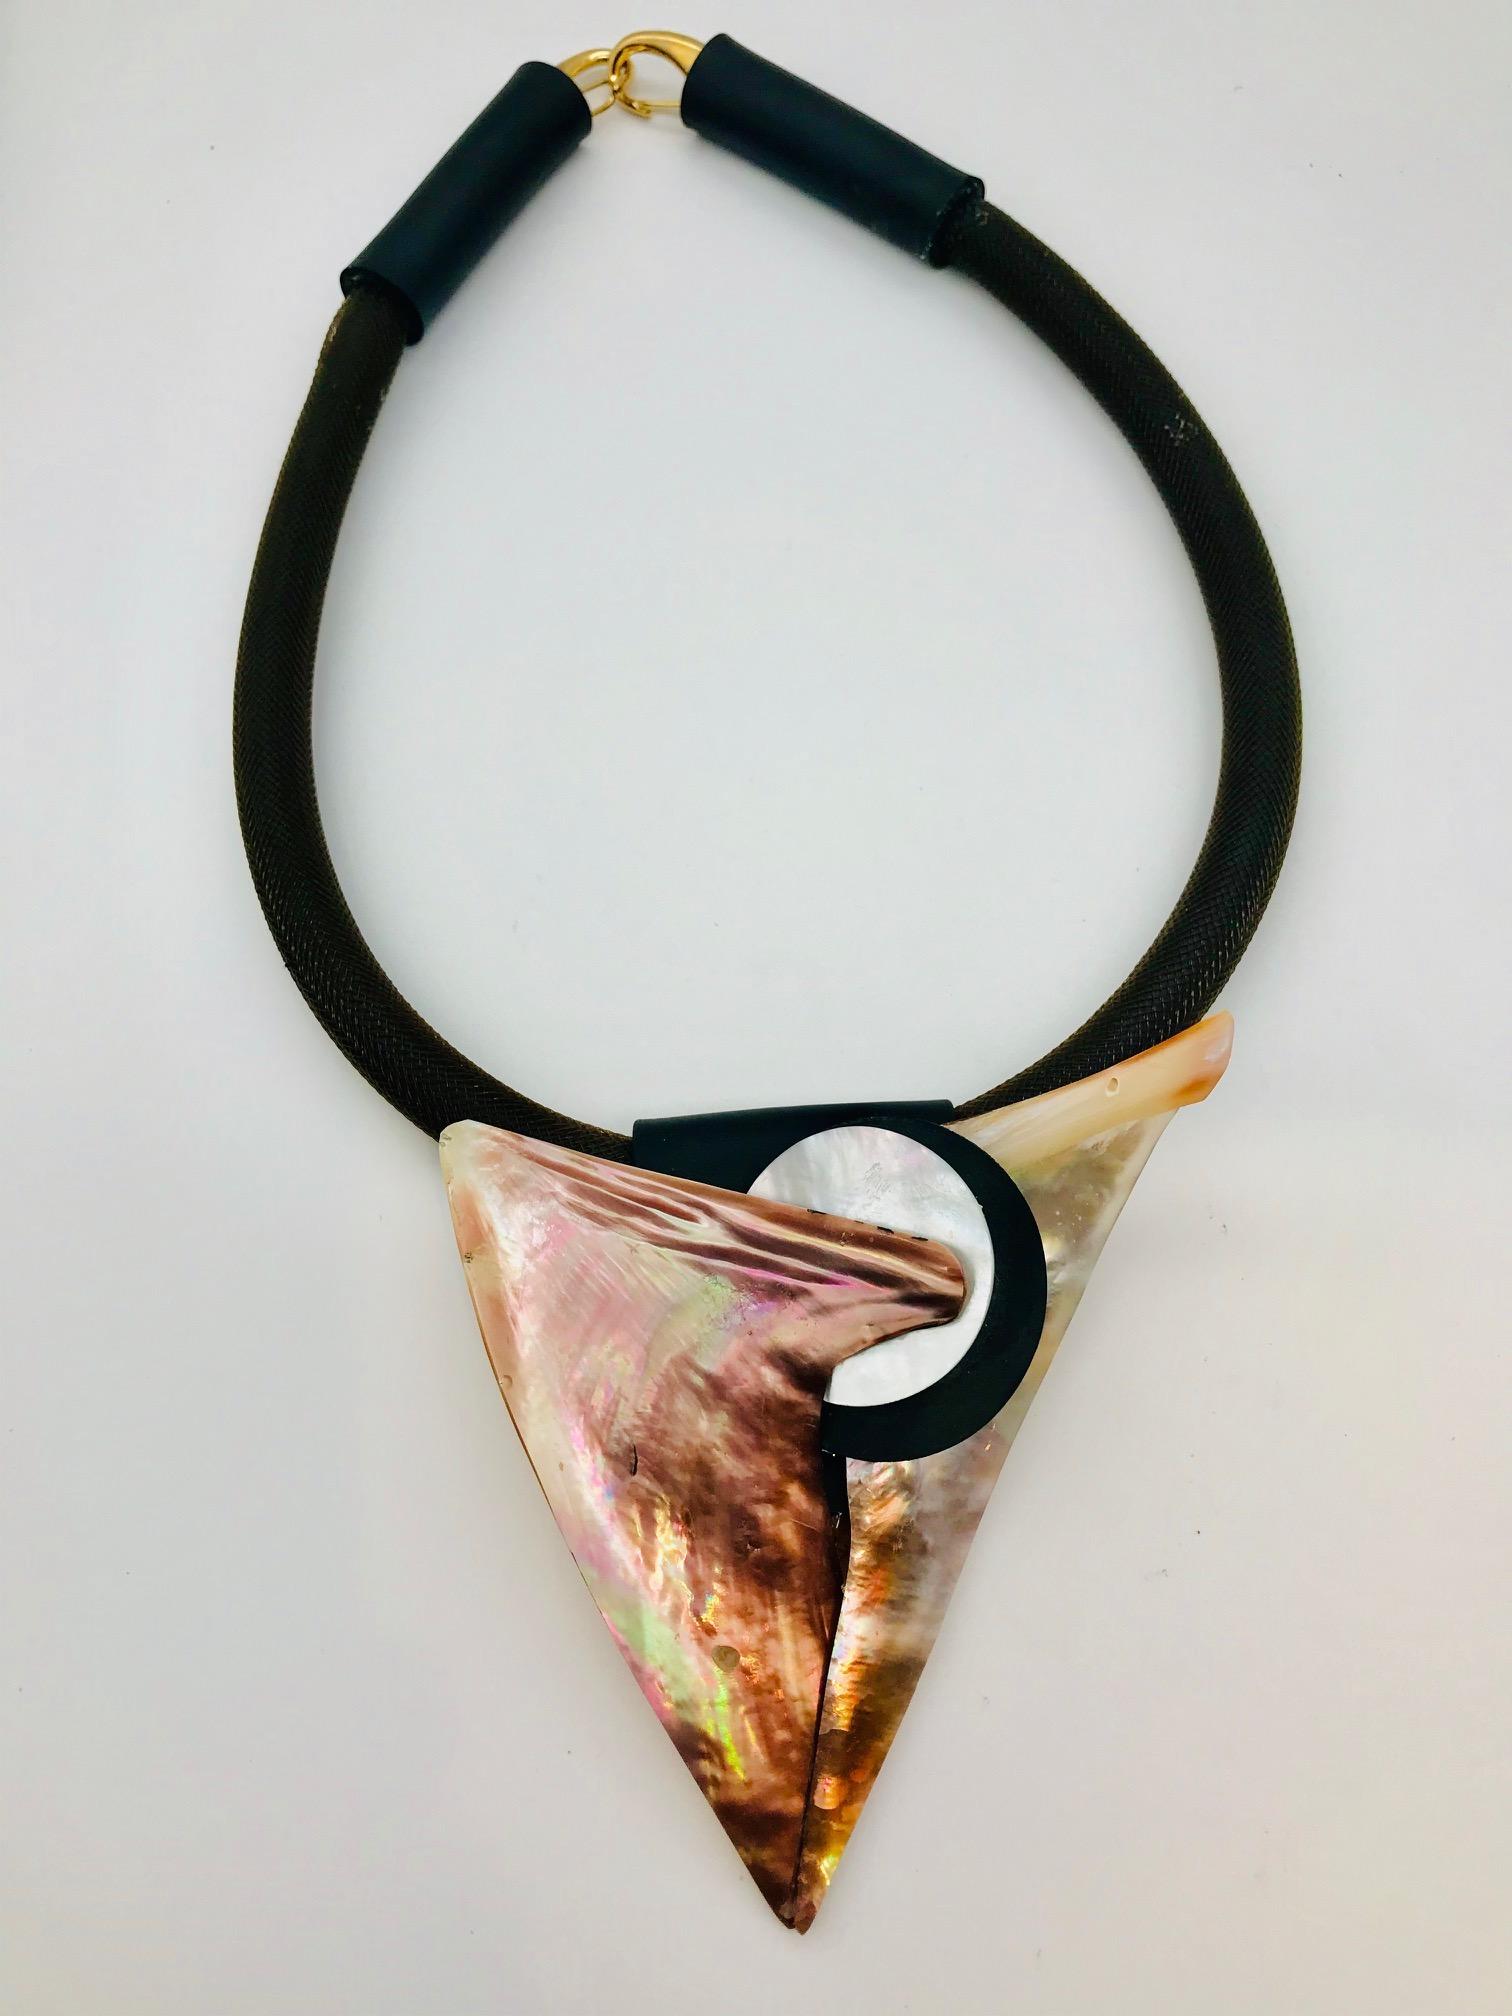 This Pendant Necklace is made from brown /gold nacre, which is eco–luxe and eco -friendly. This pendant is composed of two triangular shapes joined by two circular shapes made of white nacre and black rubber. The pendant is attached to a rubber tube